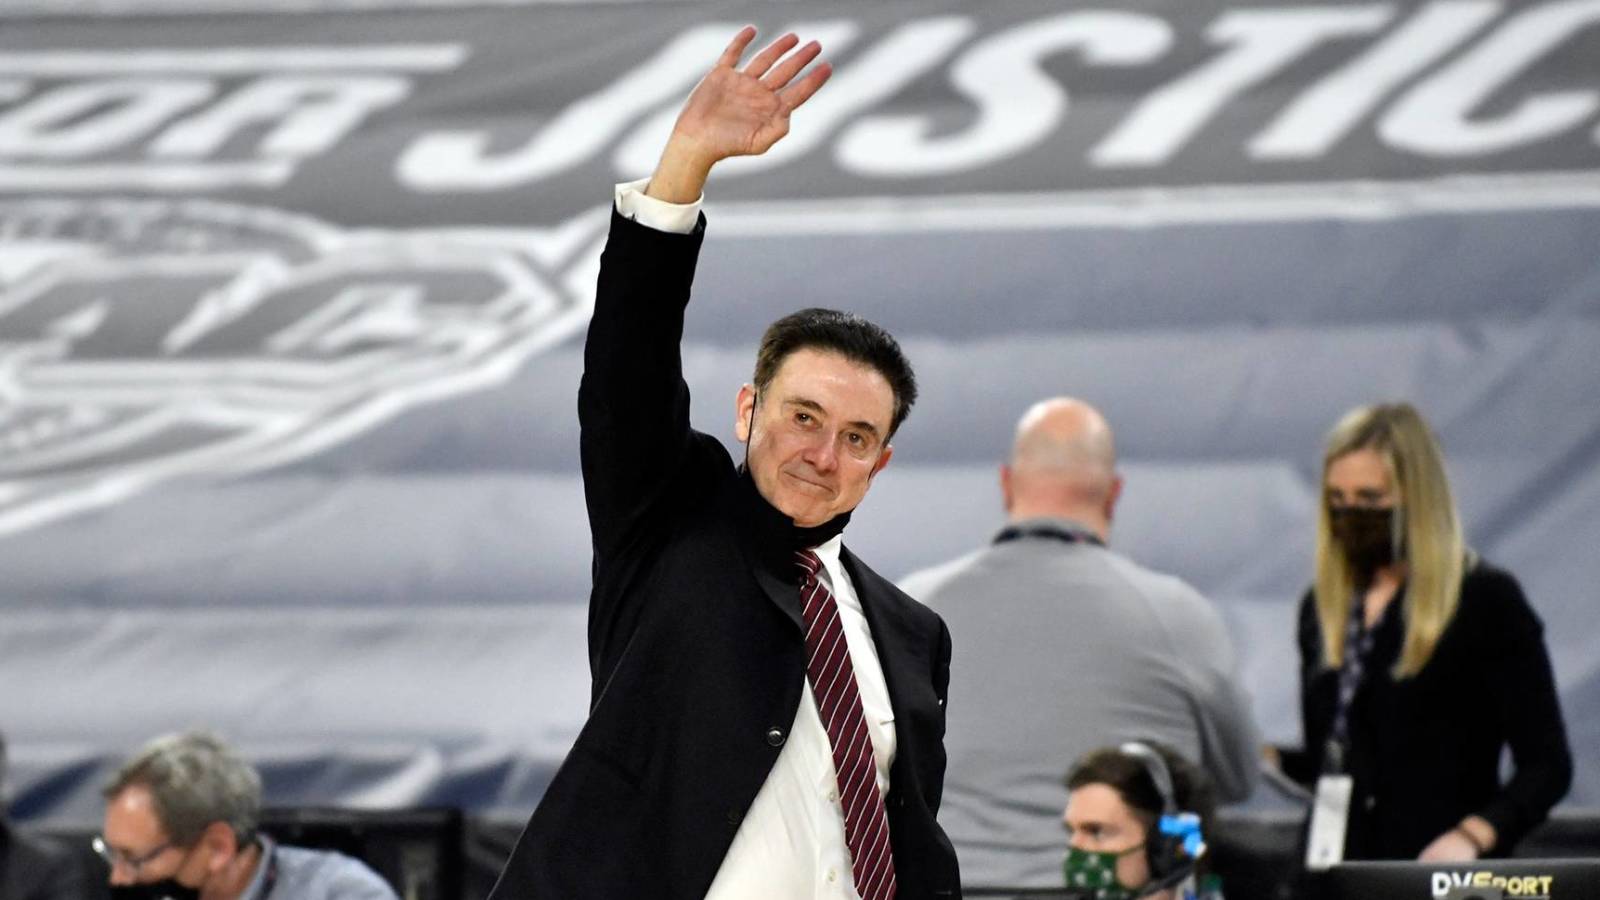 Rick Pitino ‘in heaven’ in Iona, fed up with ‘big’ schools